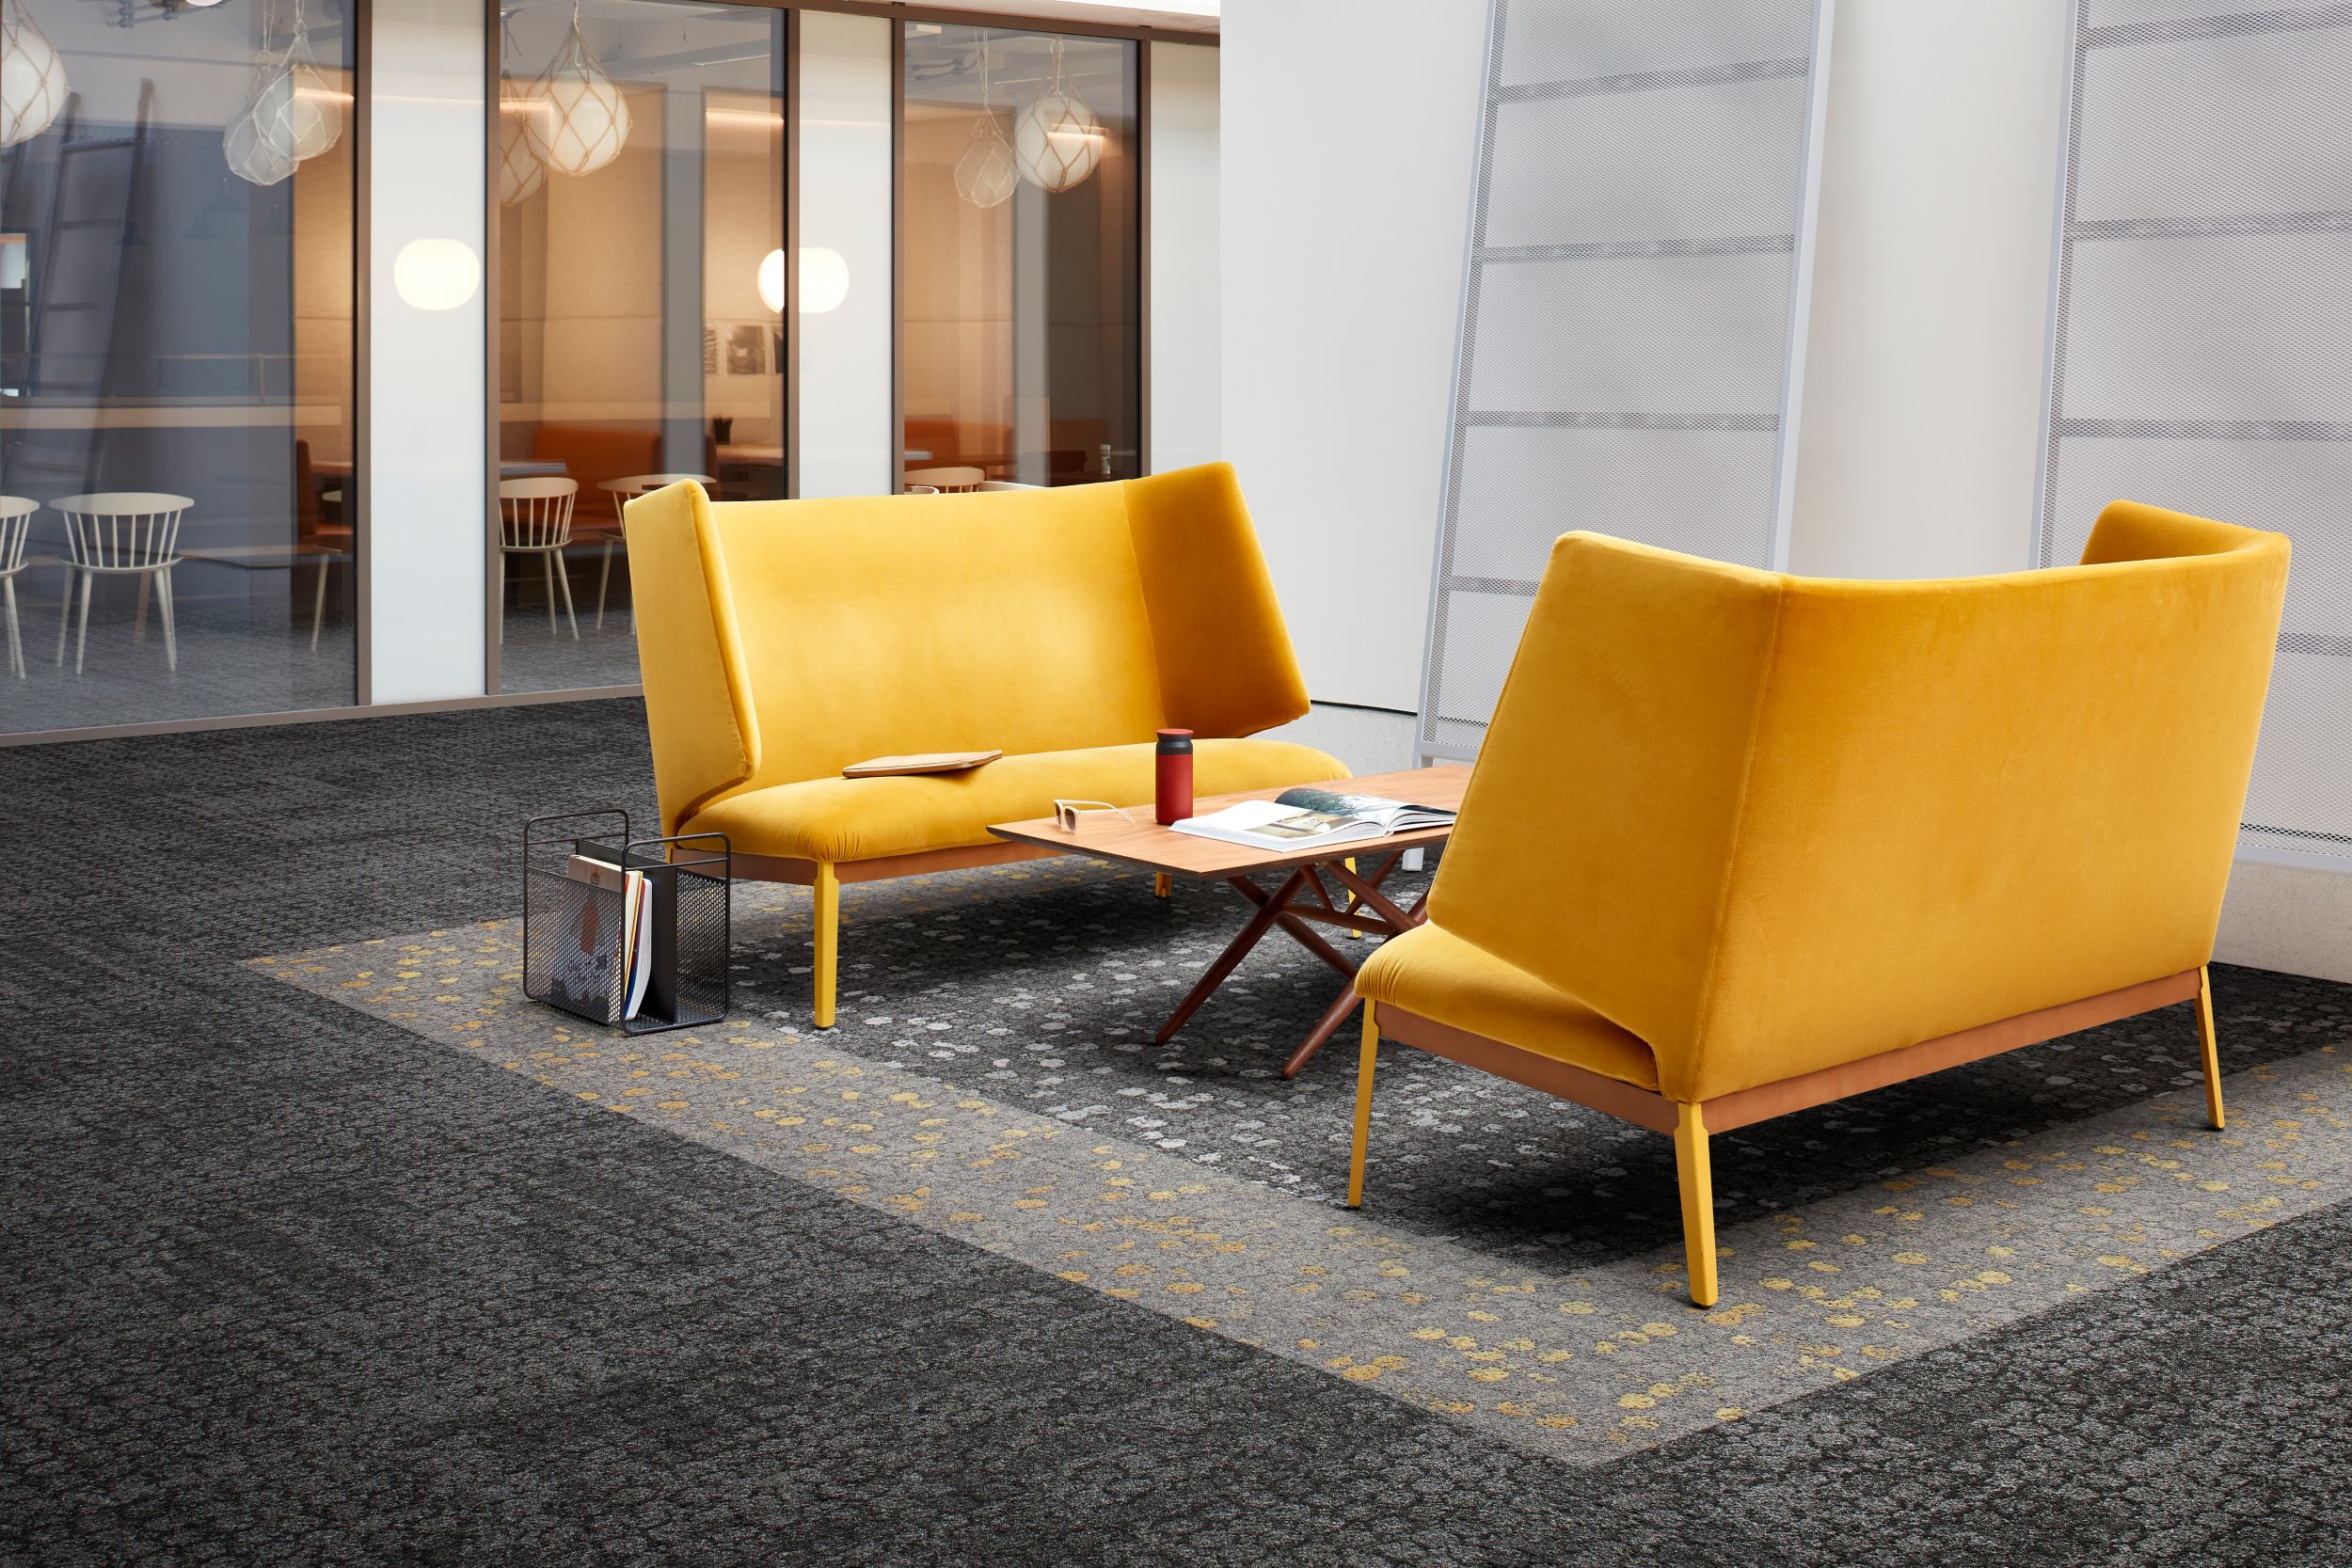 Interface Mercer Street and Broome Street carpet tile in seating area with two yellow couches número de imagen 12